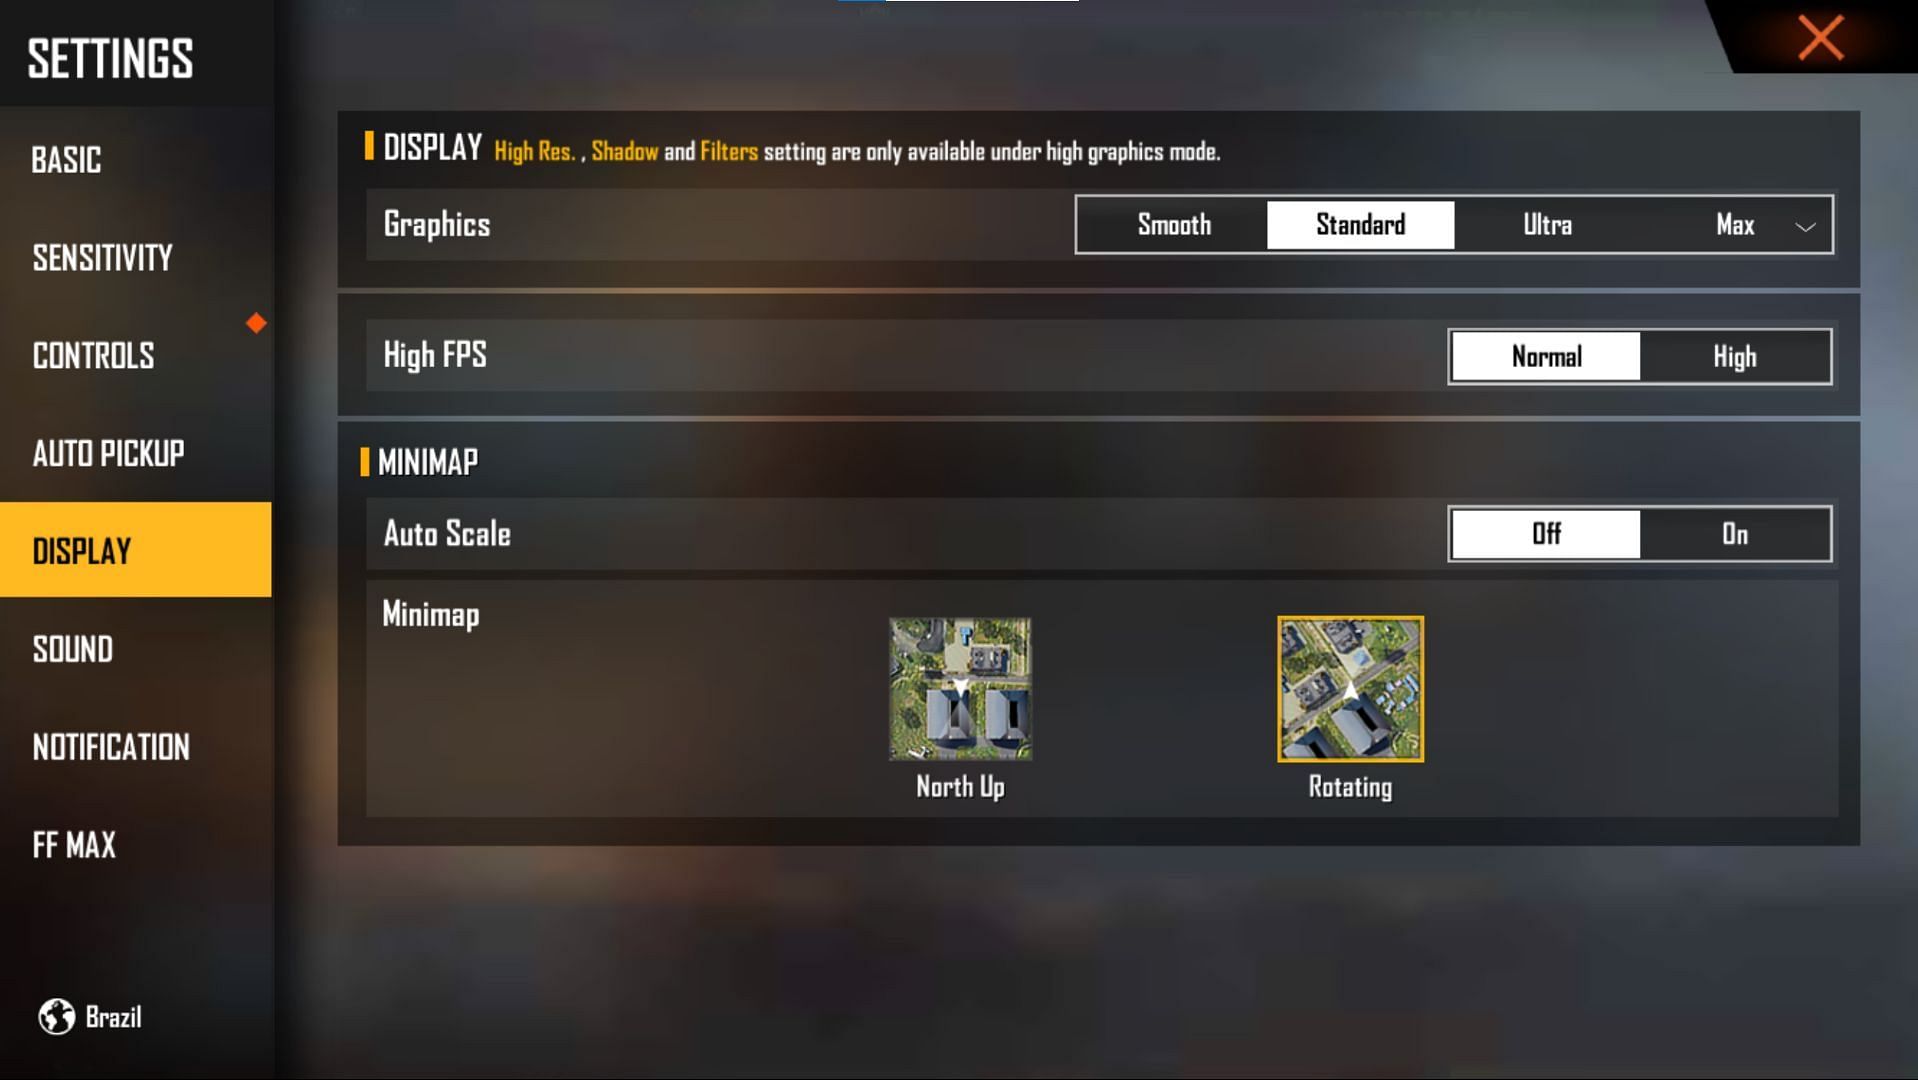 Users should try to get the maximum possible FPS (Image via Garena)